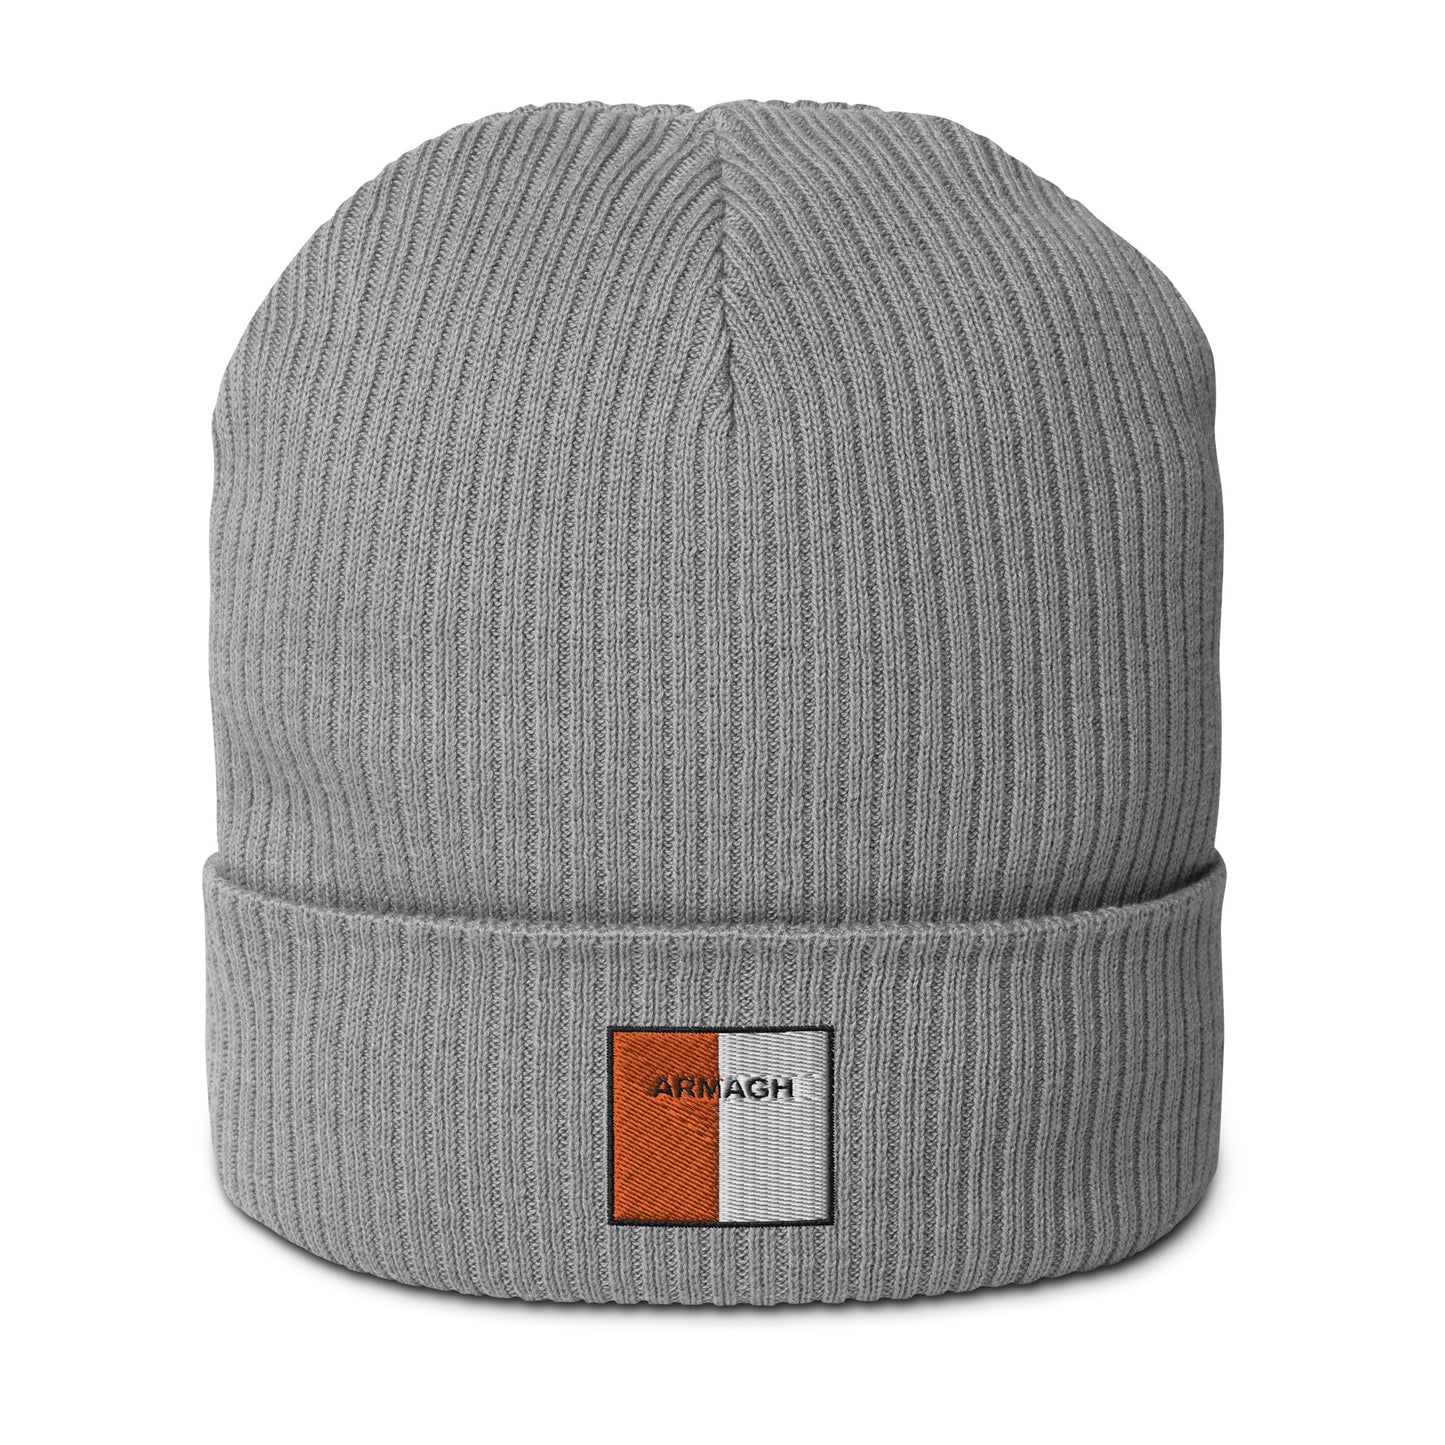 Embroidered Armagh Beanie - 100% organic cotton